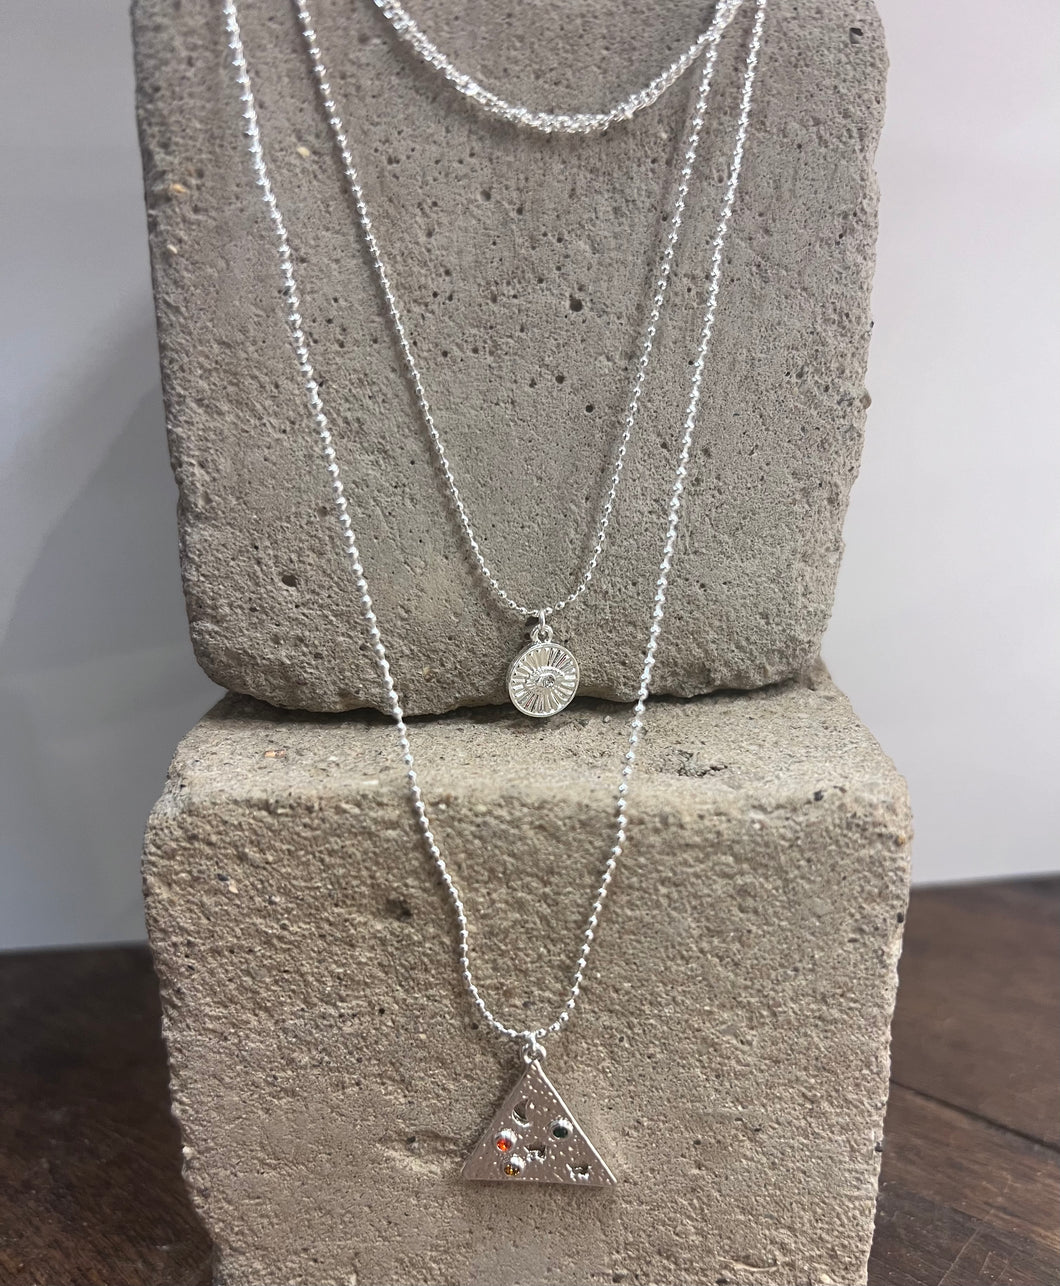 triple layered silver plated necklace with a triangular pendant with moon and stars and a circular one with the evil eye within sun rays